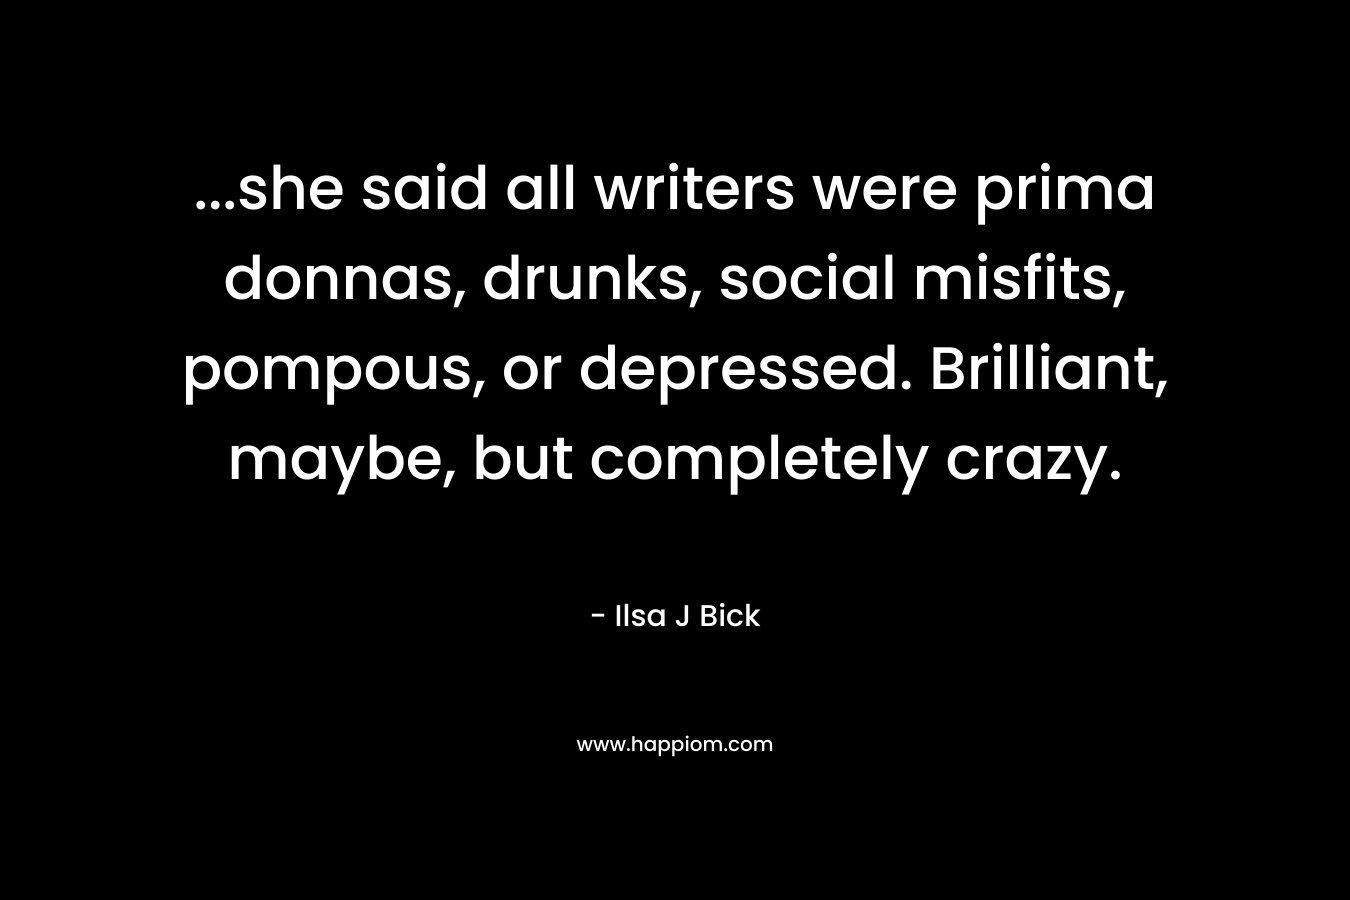 ...she said all writers were prima donnas, drunks, social misfits, pompous, or depressed. Brilliant, maybe, but completely crazy.